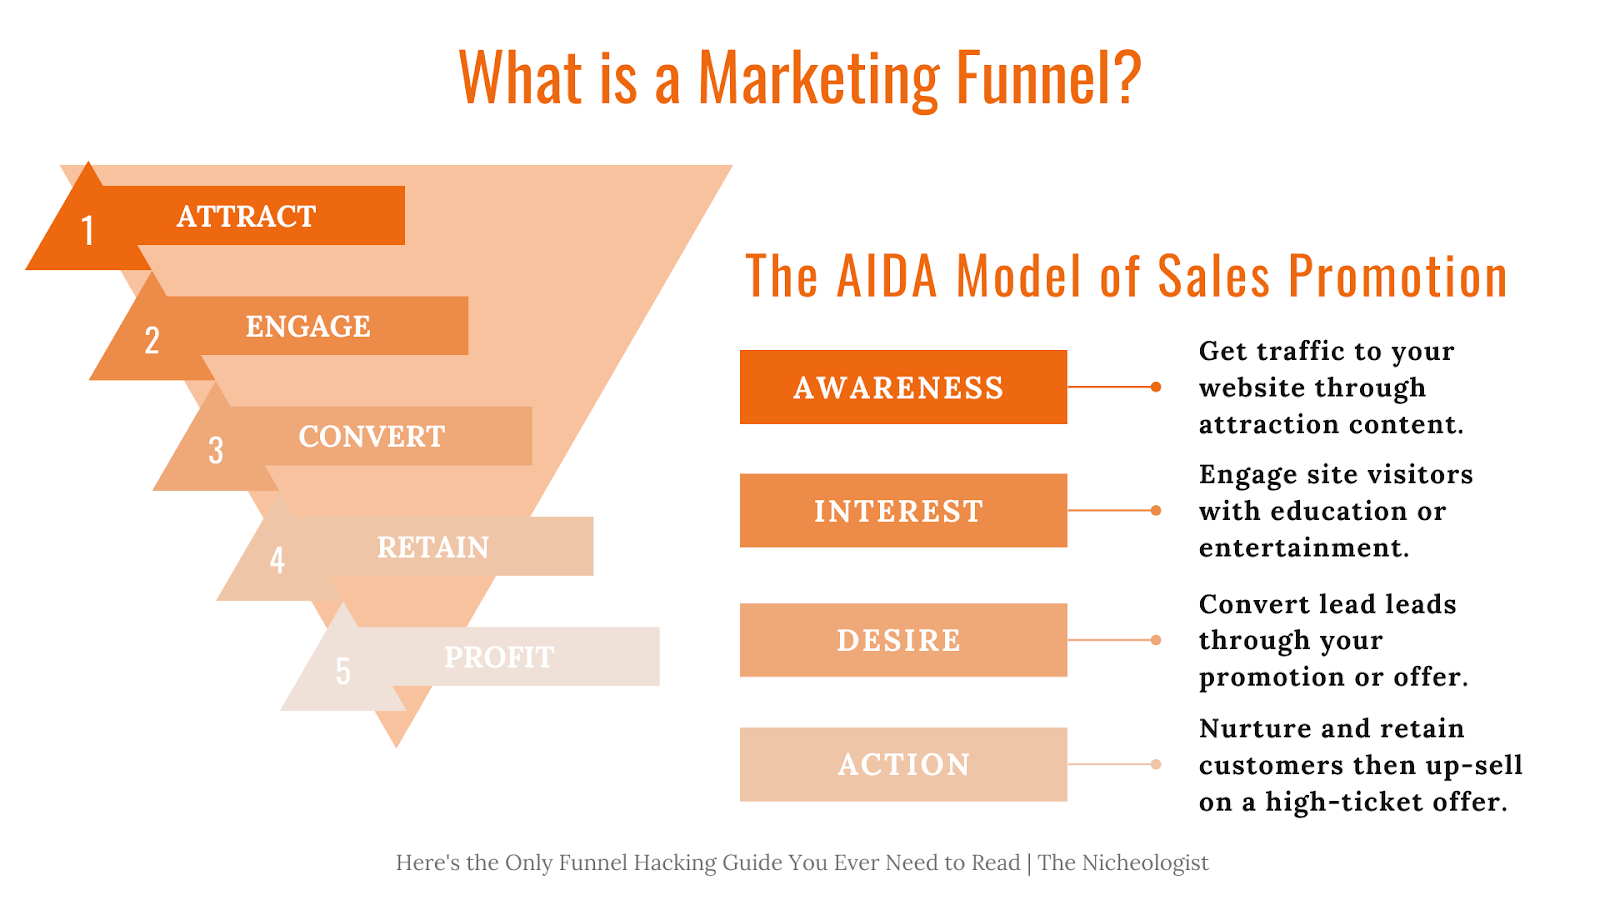 What is a funnel in marketing